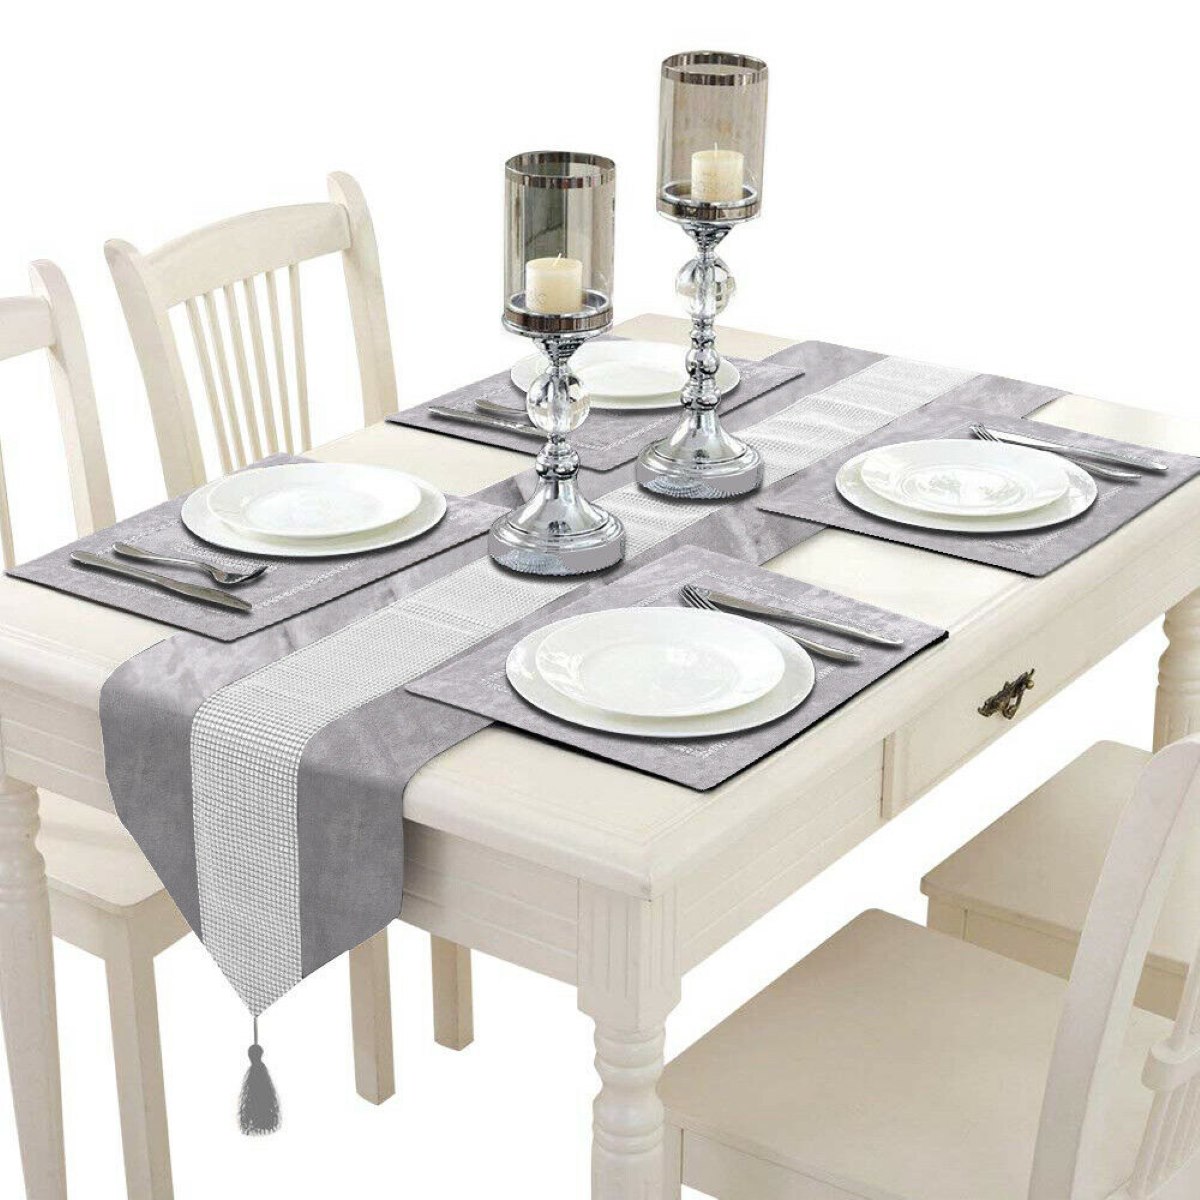 What Are Placemats Used For